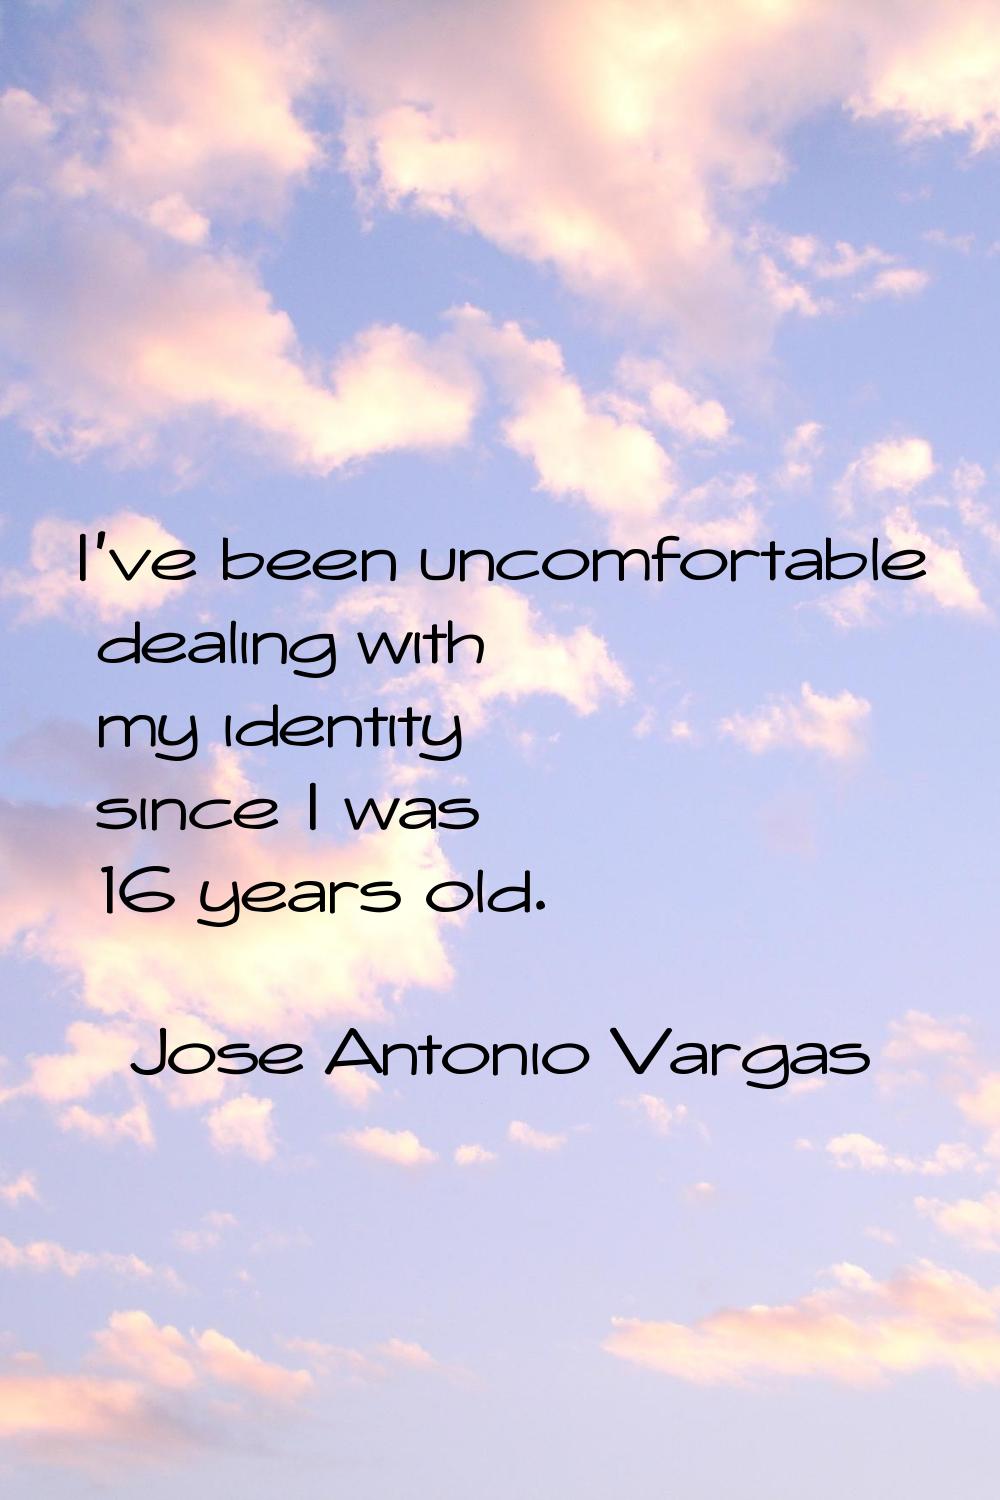 I've been uncomfortable dealing with my identity since I was 16 years old.